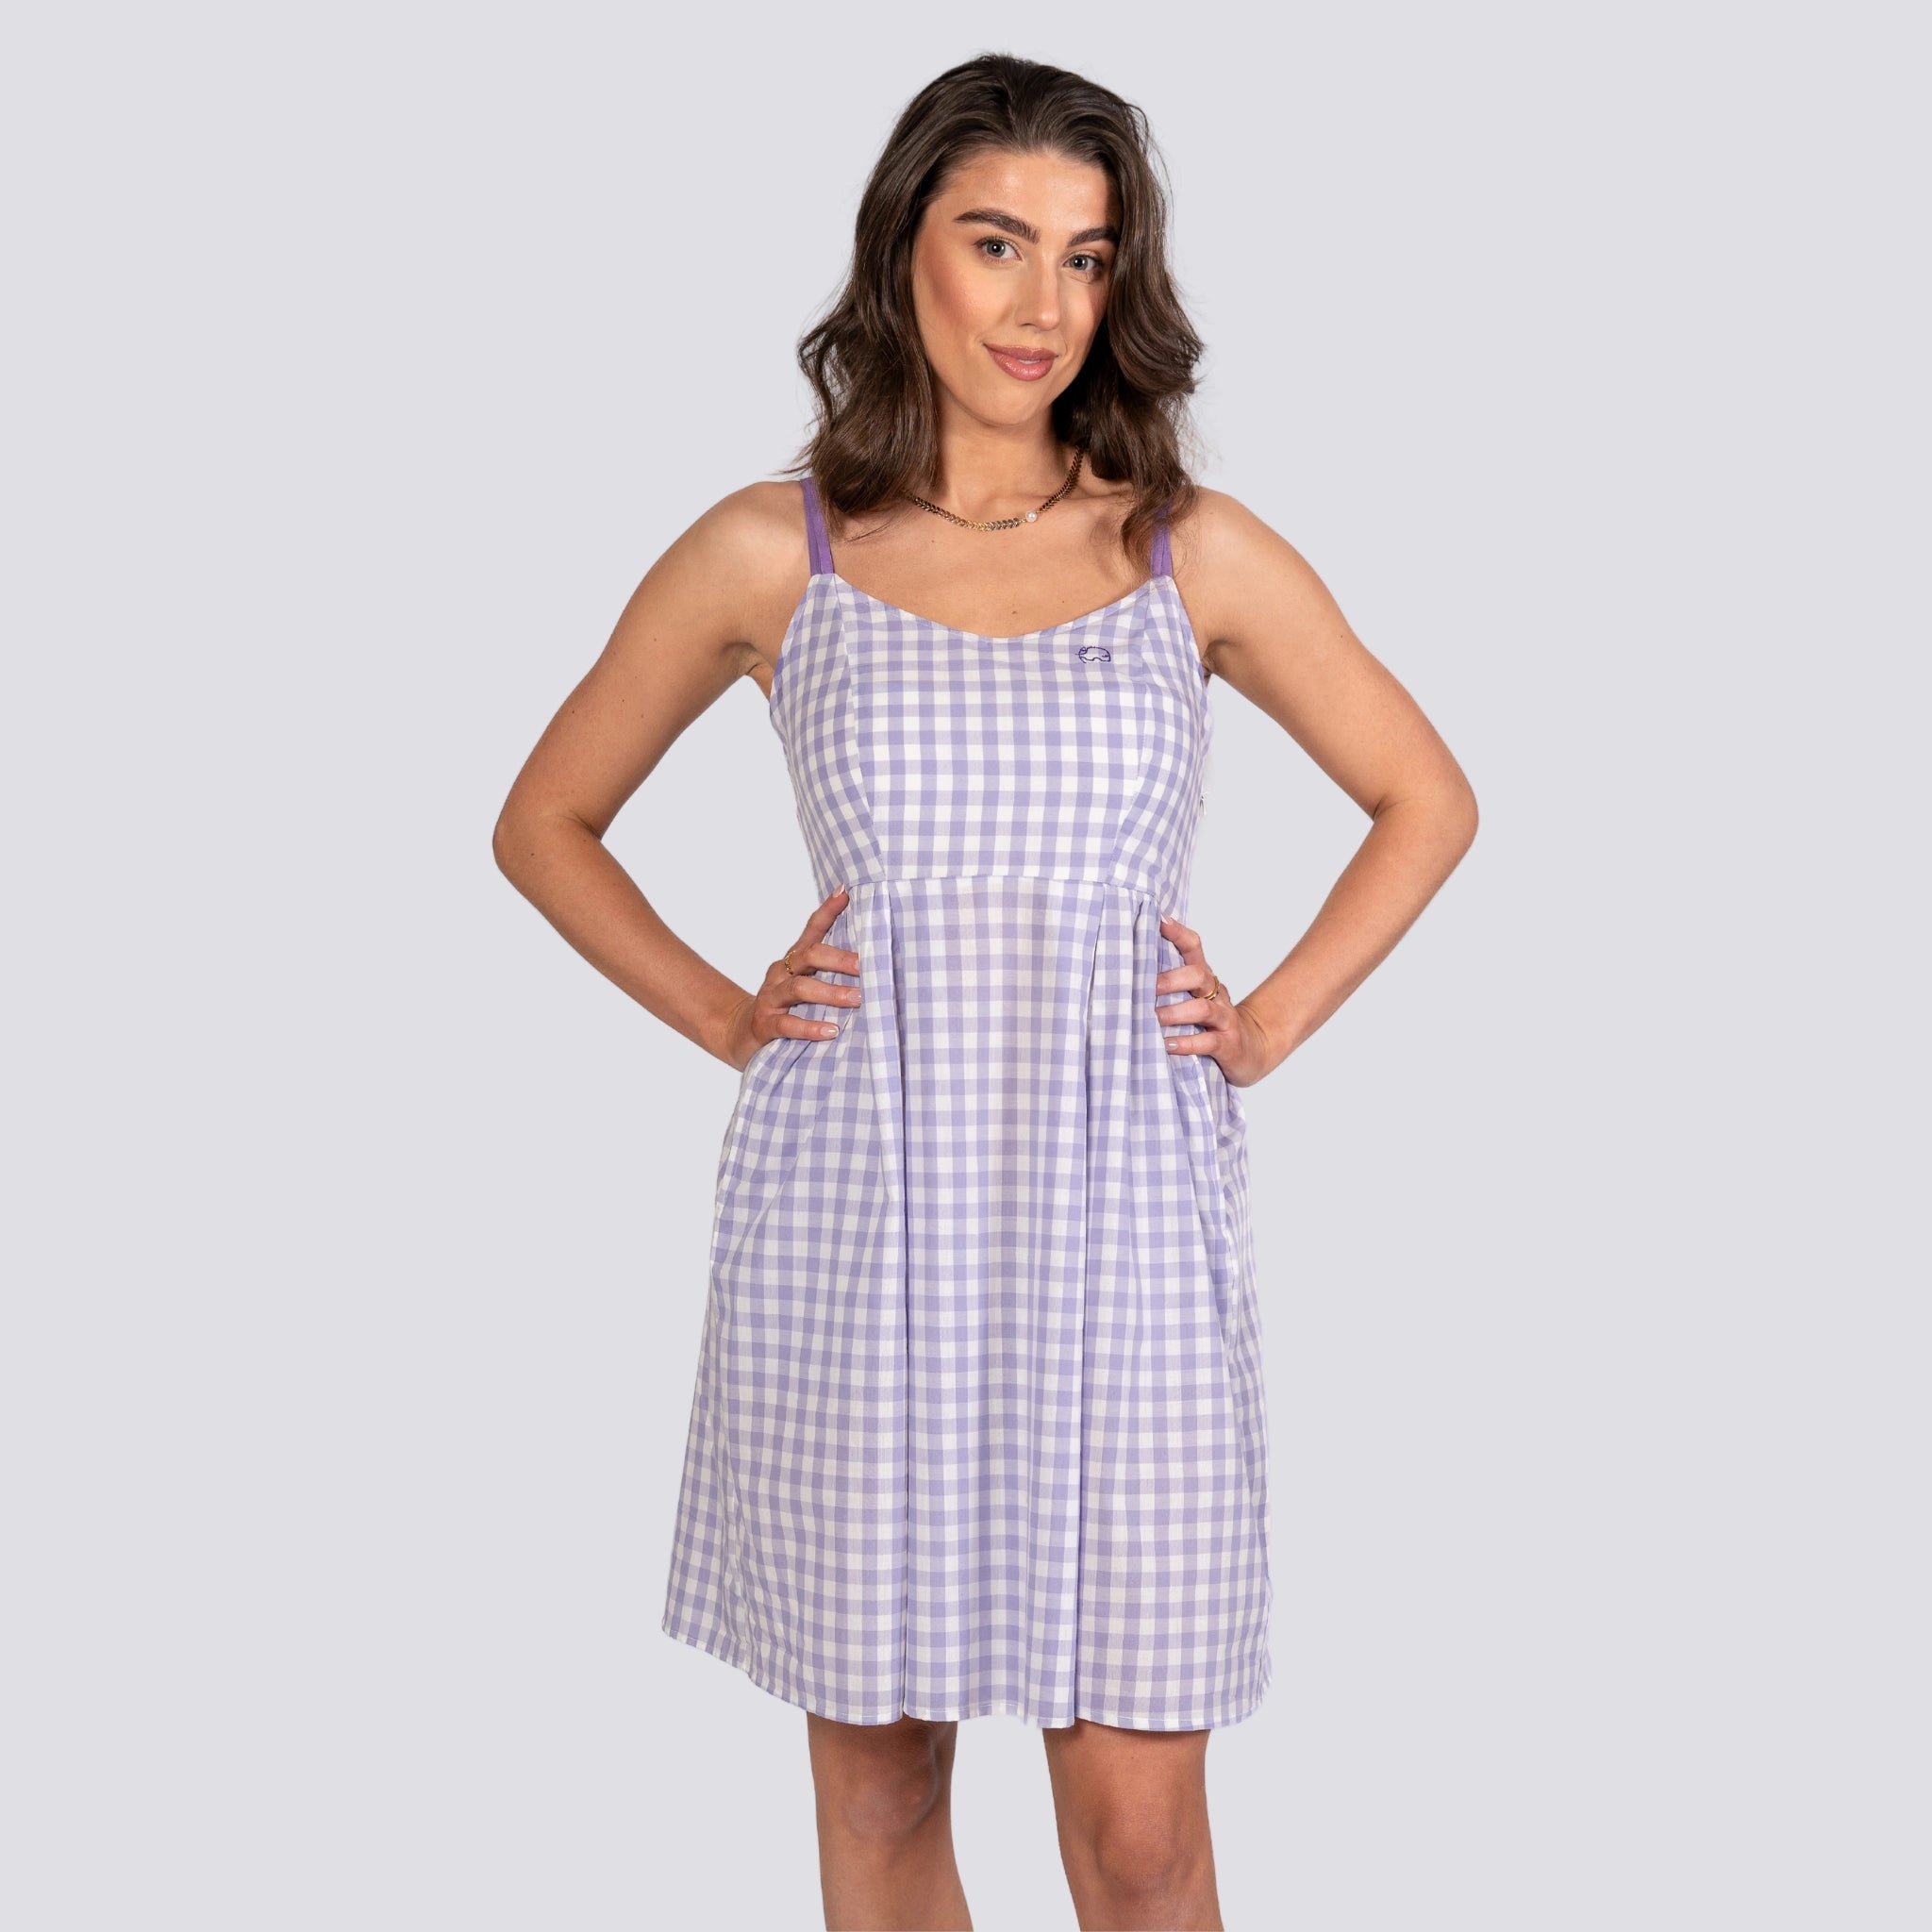 A woman stands with hands on hips, wearing a sleeveless, knee-length Effortless Summer Style: Sustainable Lavender Gingham Mini Dress by Karee in shades of white and purple.